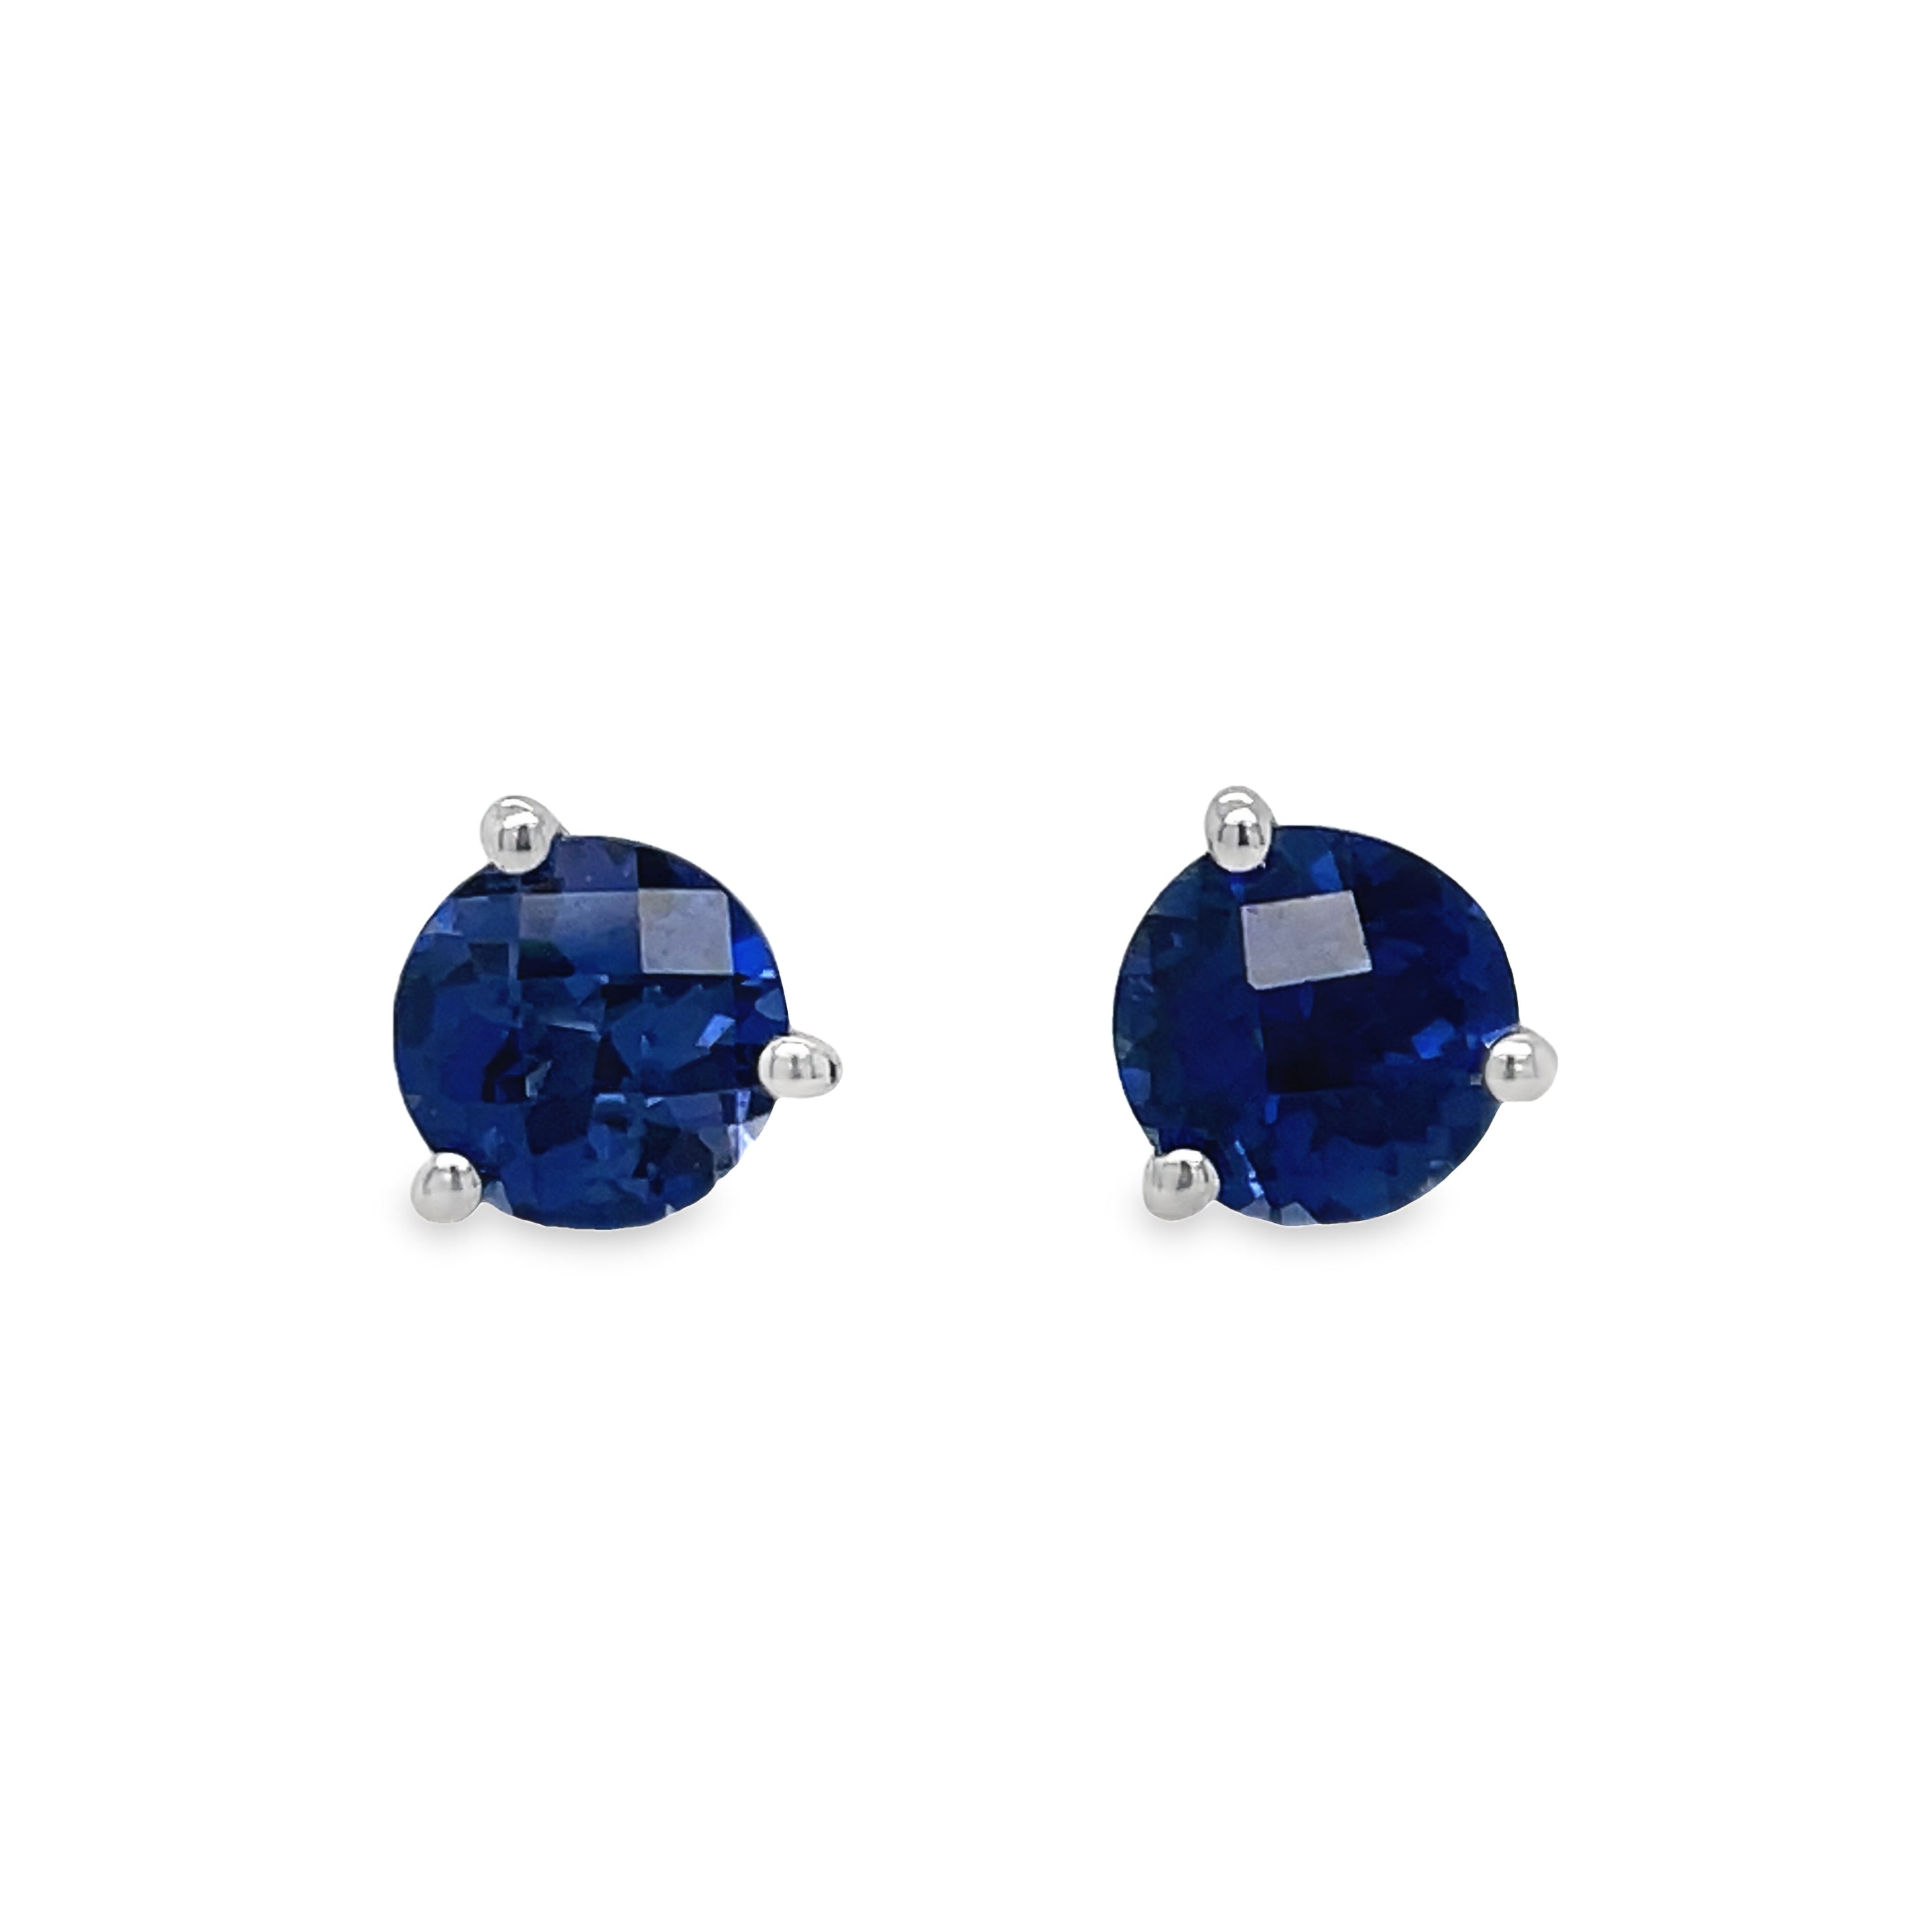 Add a touch of elegance to any outfit with our Blue Sapphire Stud Earrings. These stunning earrings feature high-quality 2.00 carat blue sapphires, set in a 14k white gold martini setting for maximum sparkle. Perfect for any occasion, these earrings are a timeless addition to any jewelry collection.